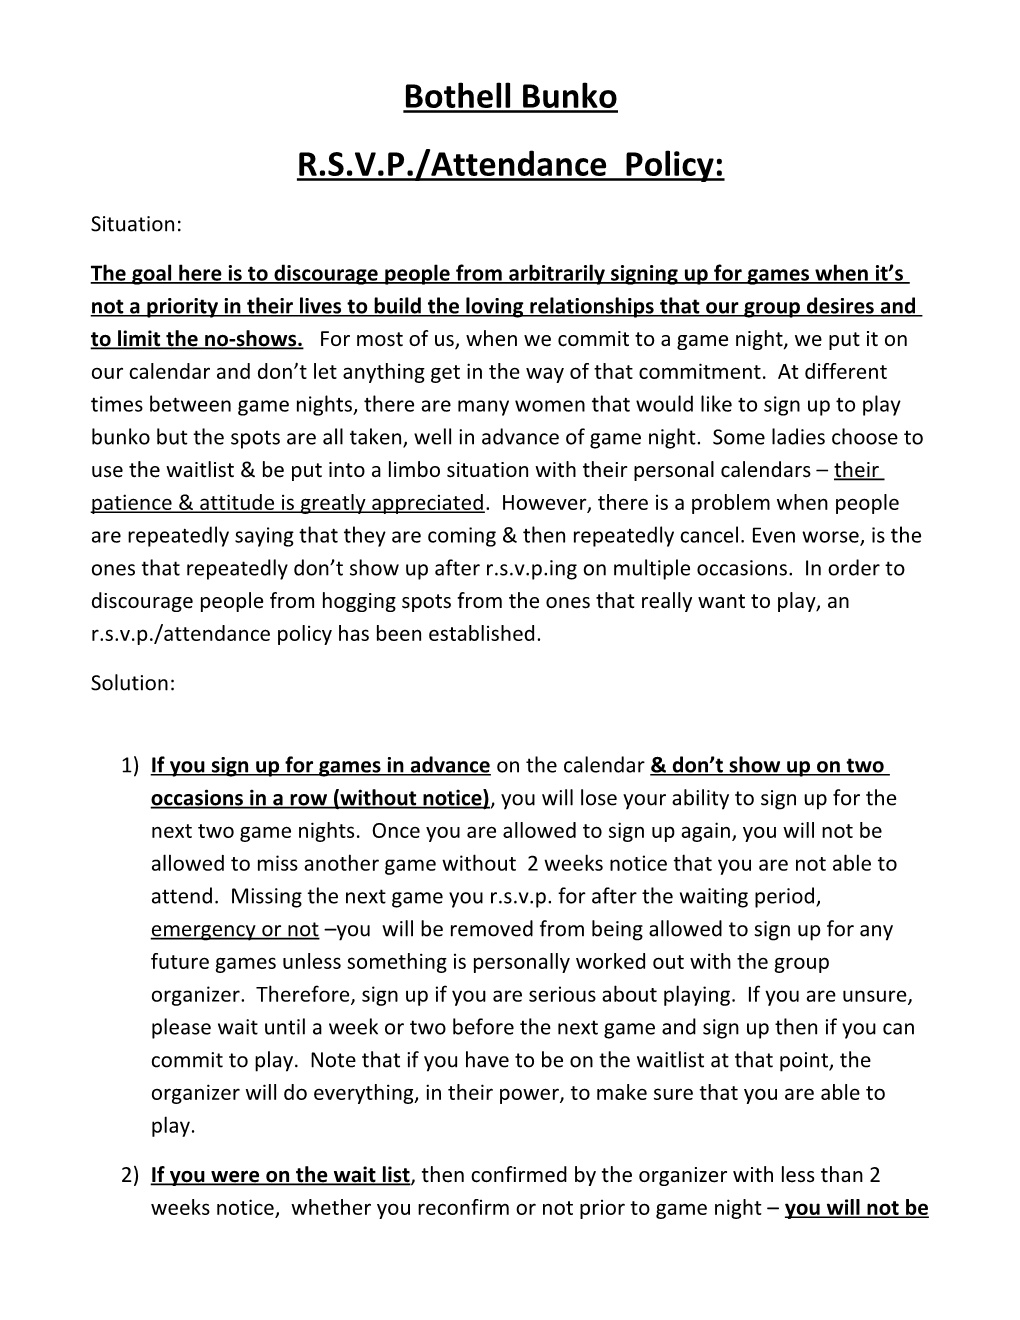 R.S.V.P./Attendance Policy